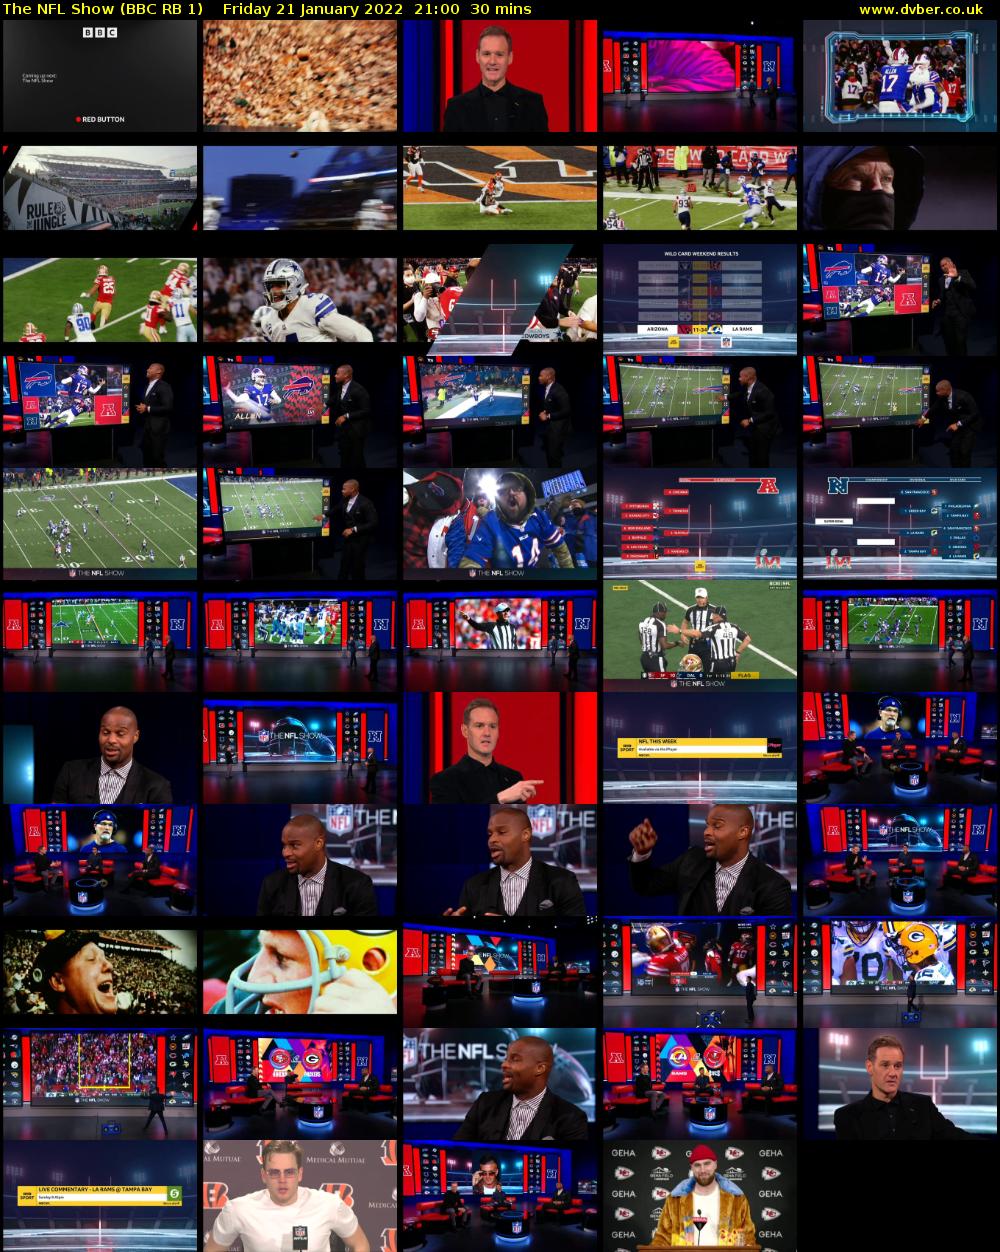 The NFL Show (BBC RB 1) Friday 21 January 2022 21:00 - 21:30